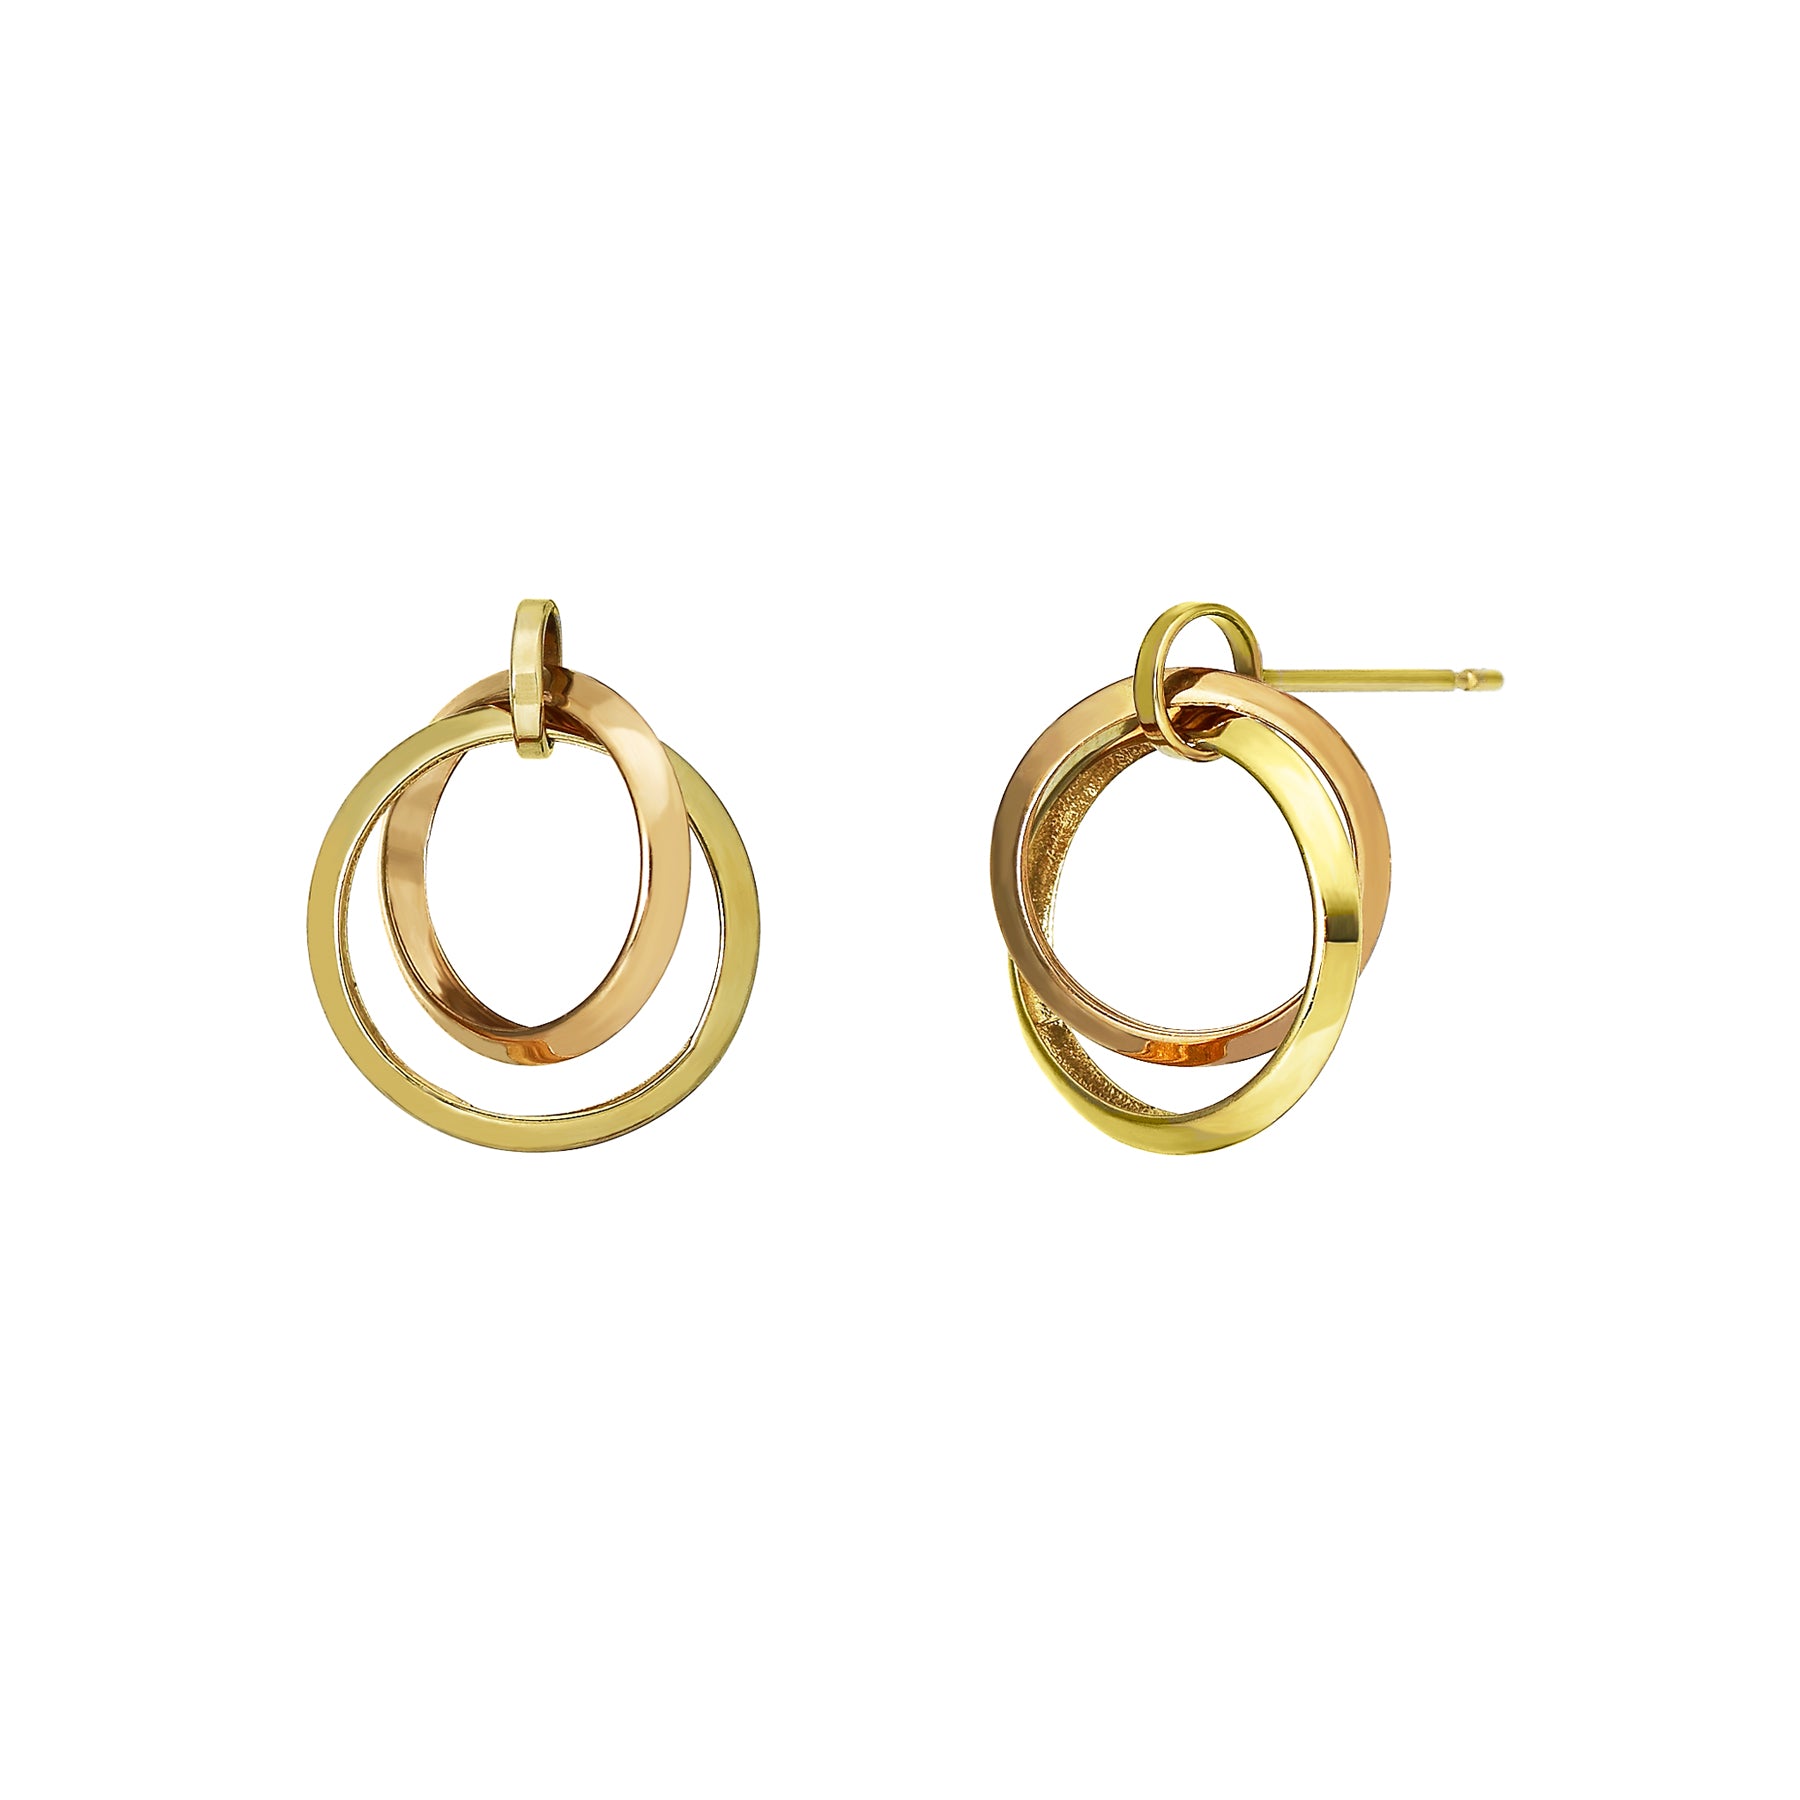 18K/10K Gold Tripartite Circle Earrings (Yellow Gold / Rose Gold) - Product Image